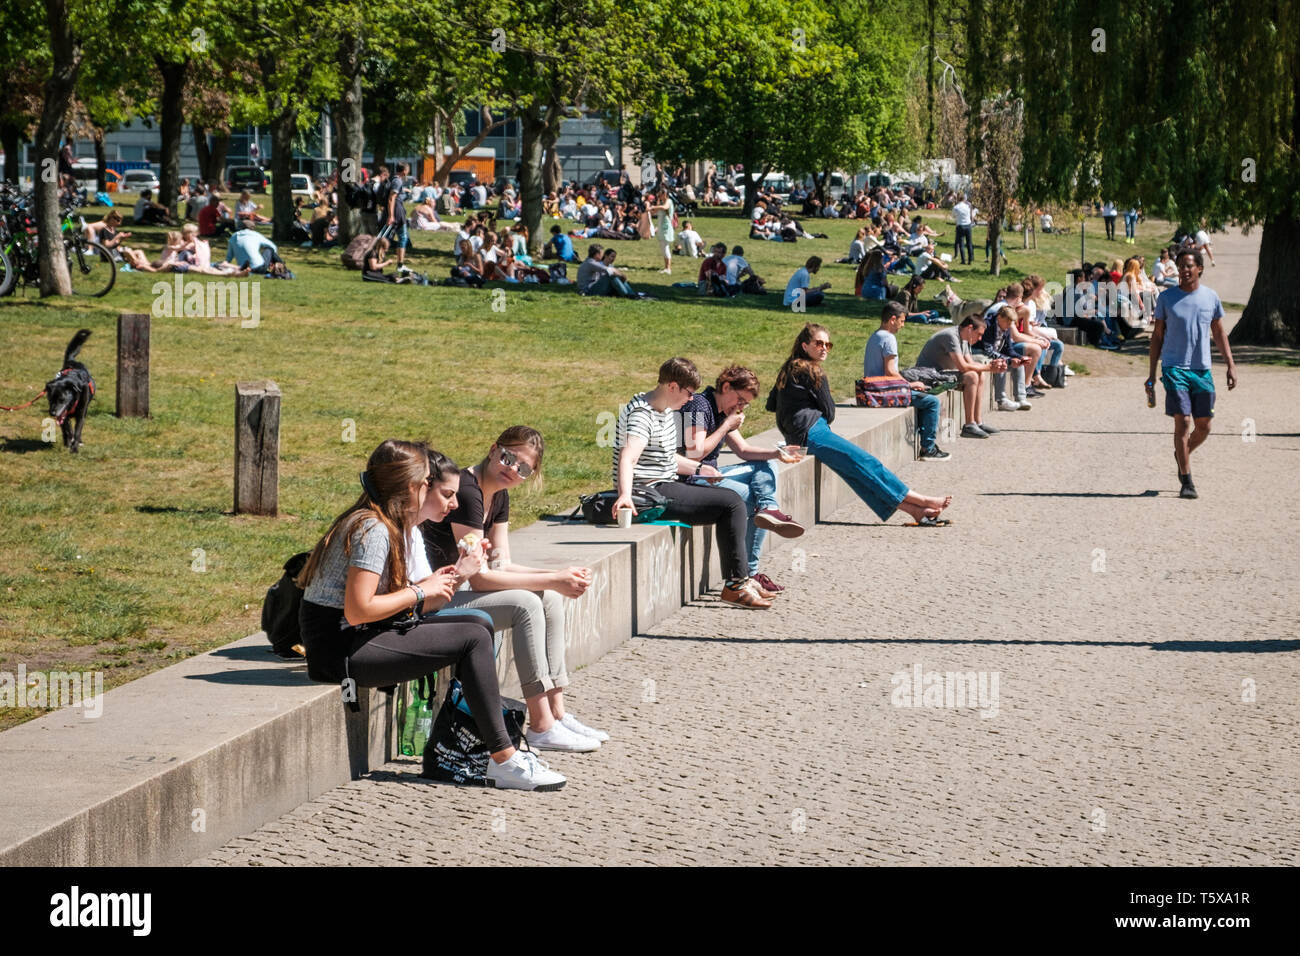 Berlin, Germany - April, 2019: People in Park on a sunny summer day in Berlin, Germany Stock Photo